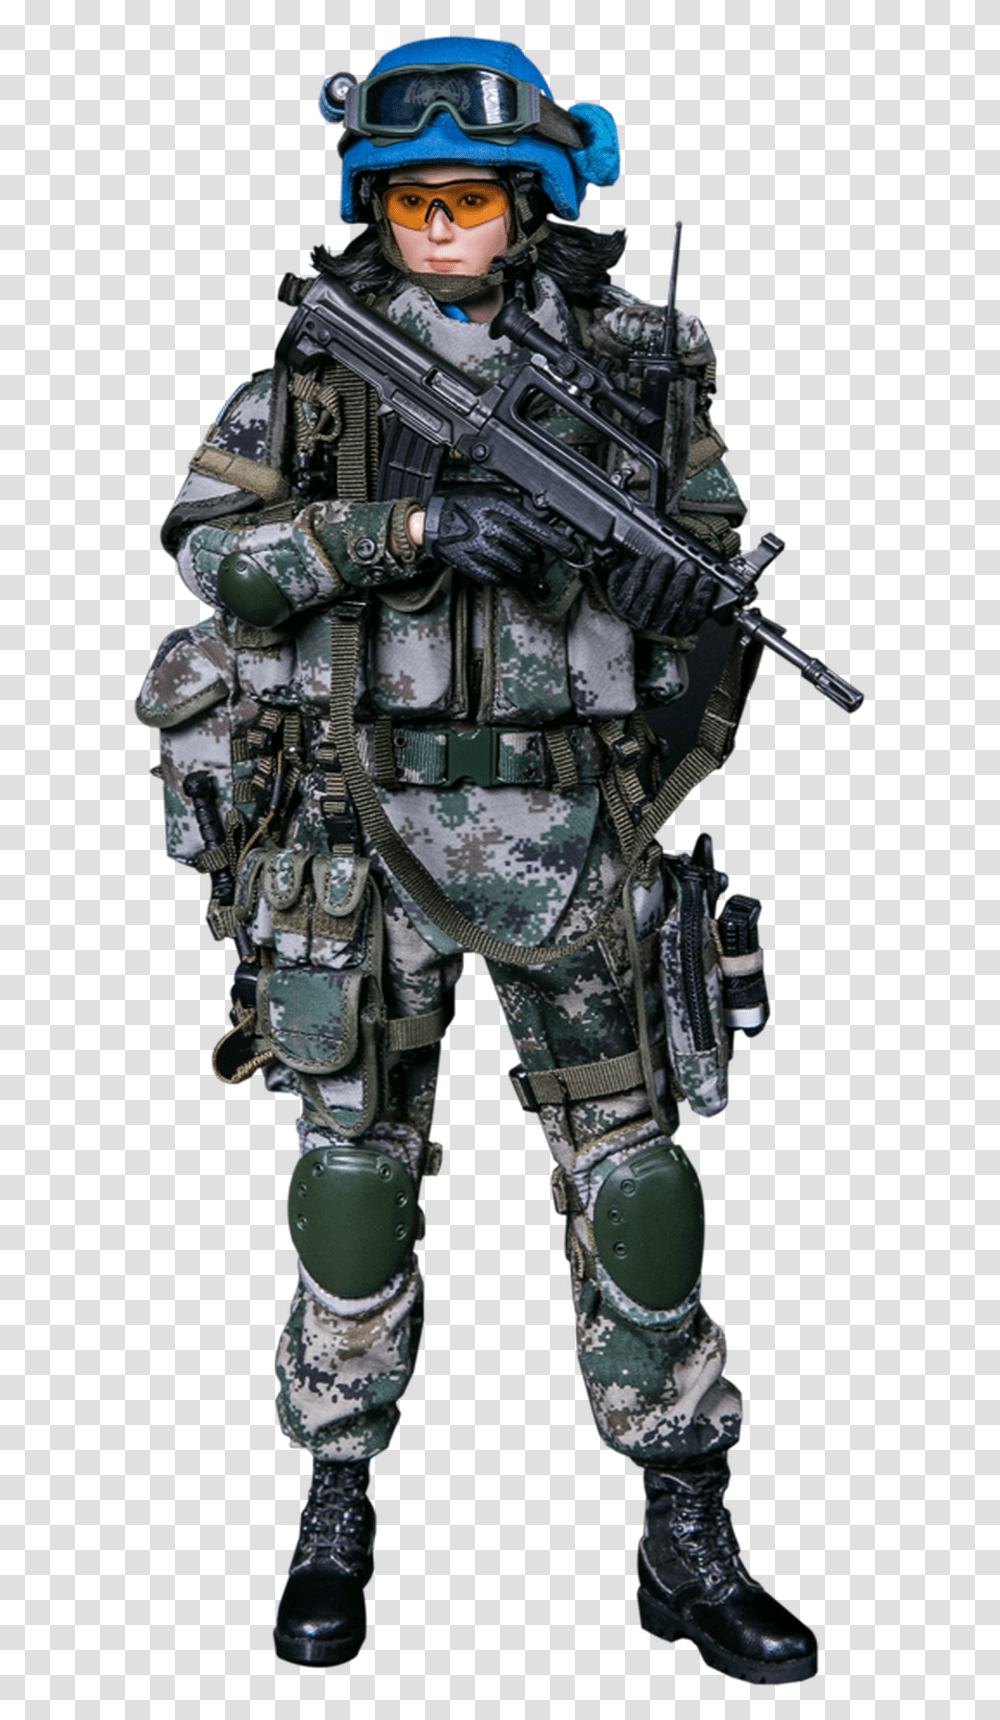 Female Soldier Pla In Un Peacekeeping Operations Toys Female Soldier, Helmet, Gun, Weapon Transparent Png